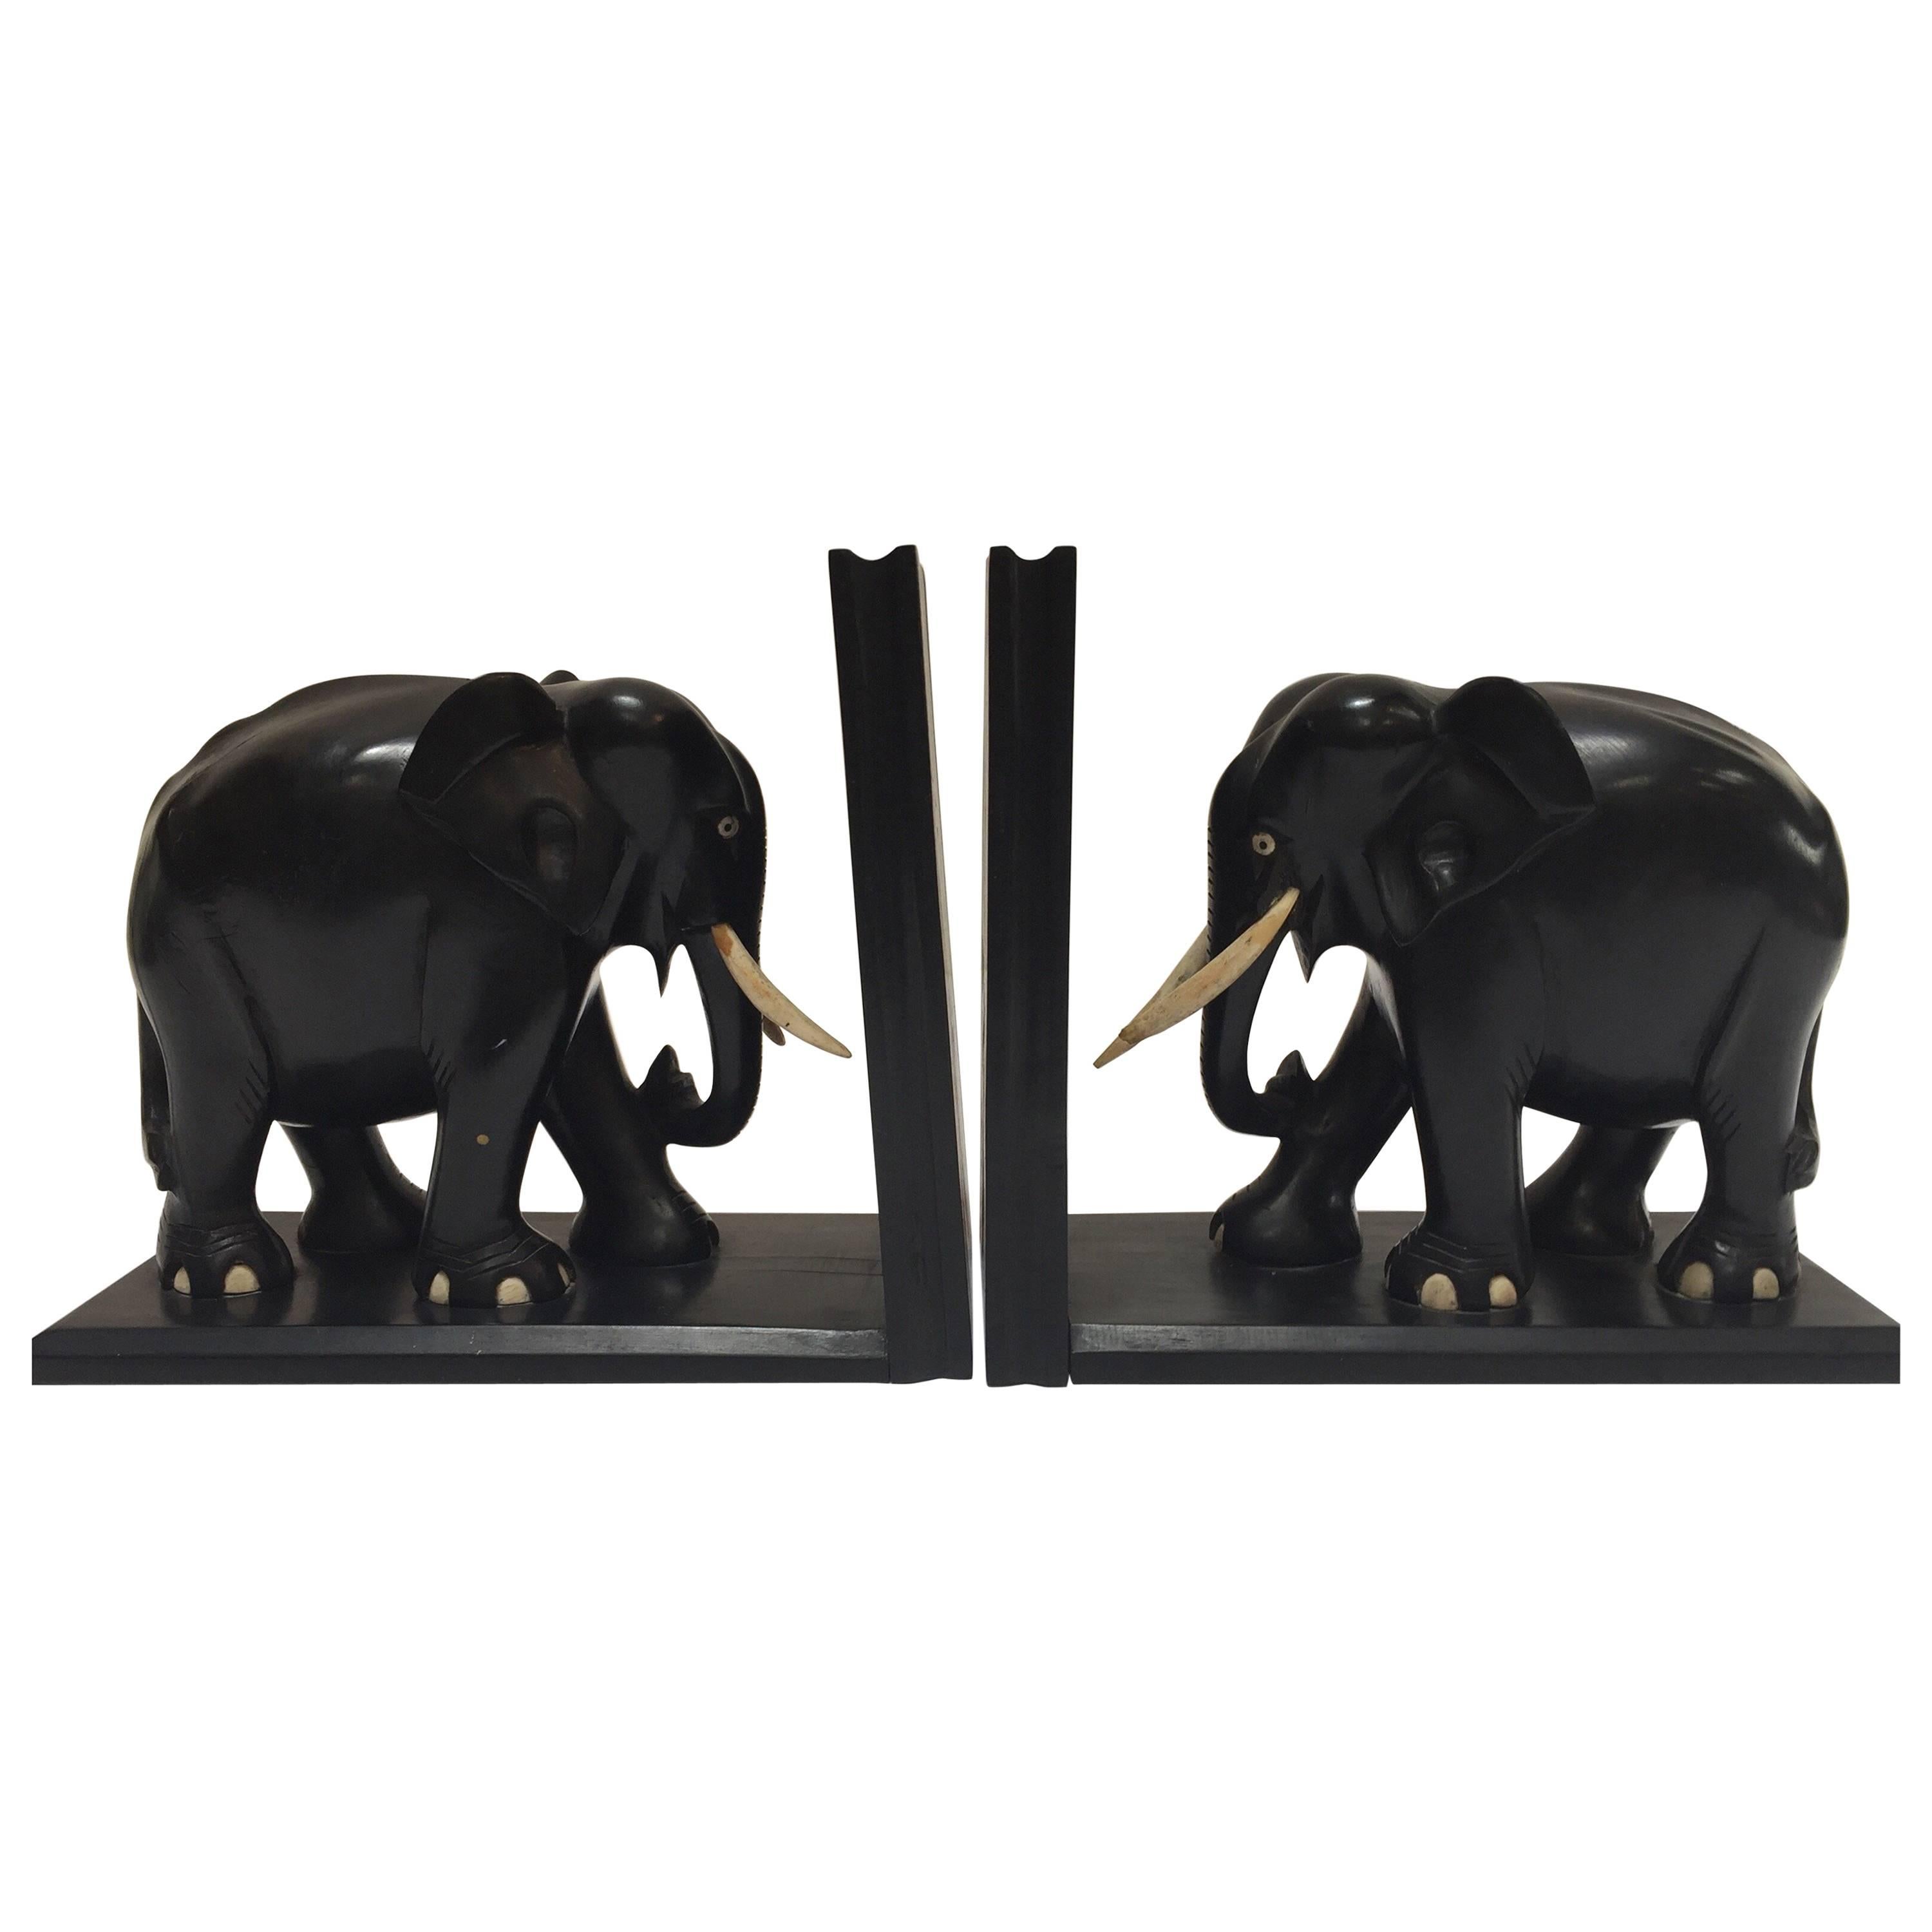 Hand-Carved Large Ebonized African Elephant Bookends, circa 1950